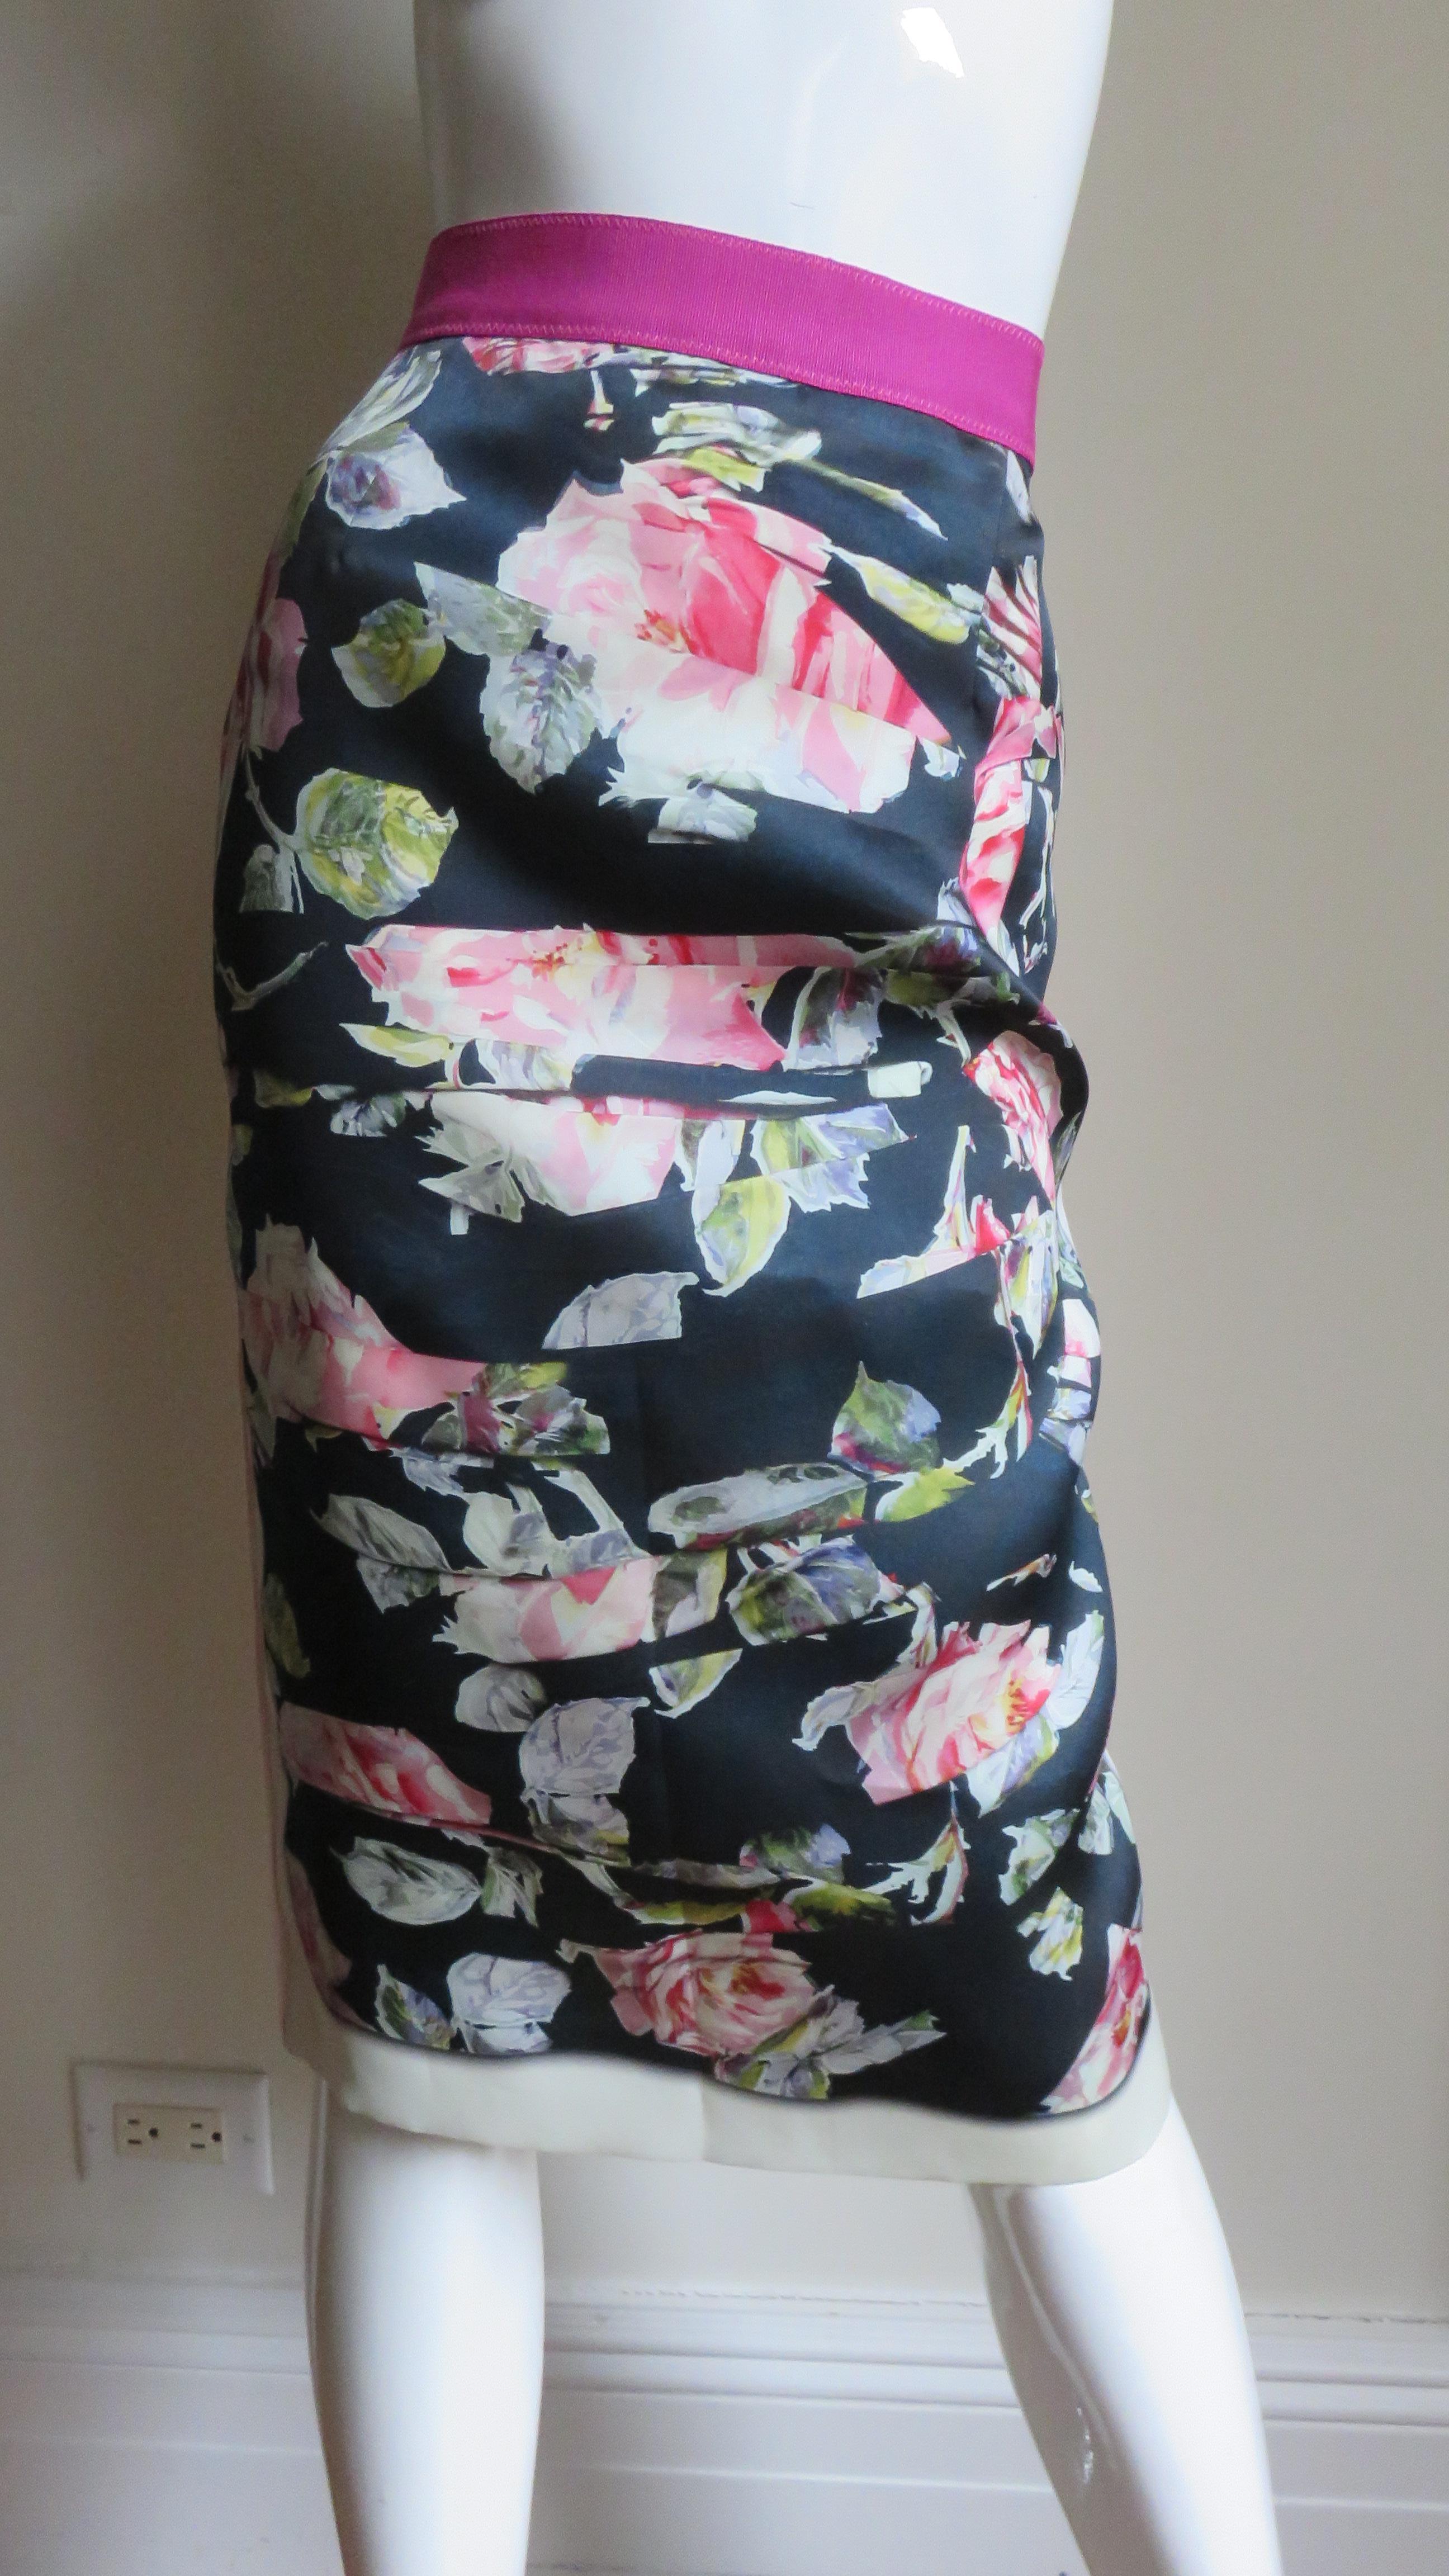 A fabulous silk skirt from Dolce and Gabbana in black, white and shades of pink. It is pencil style with a 2